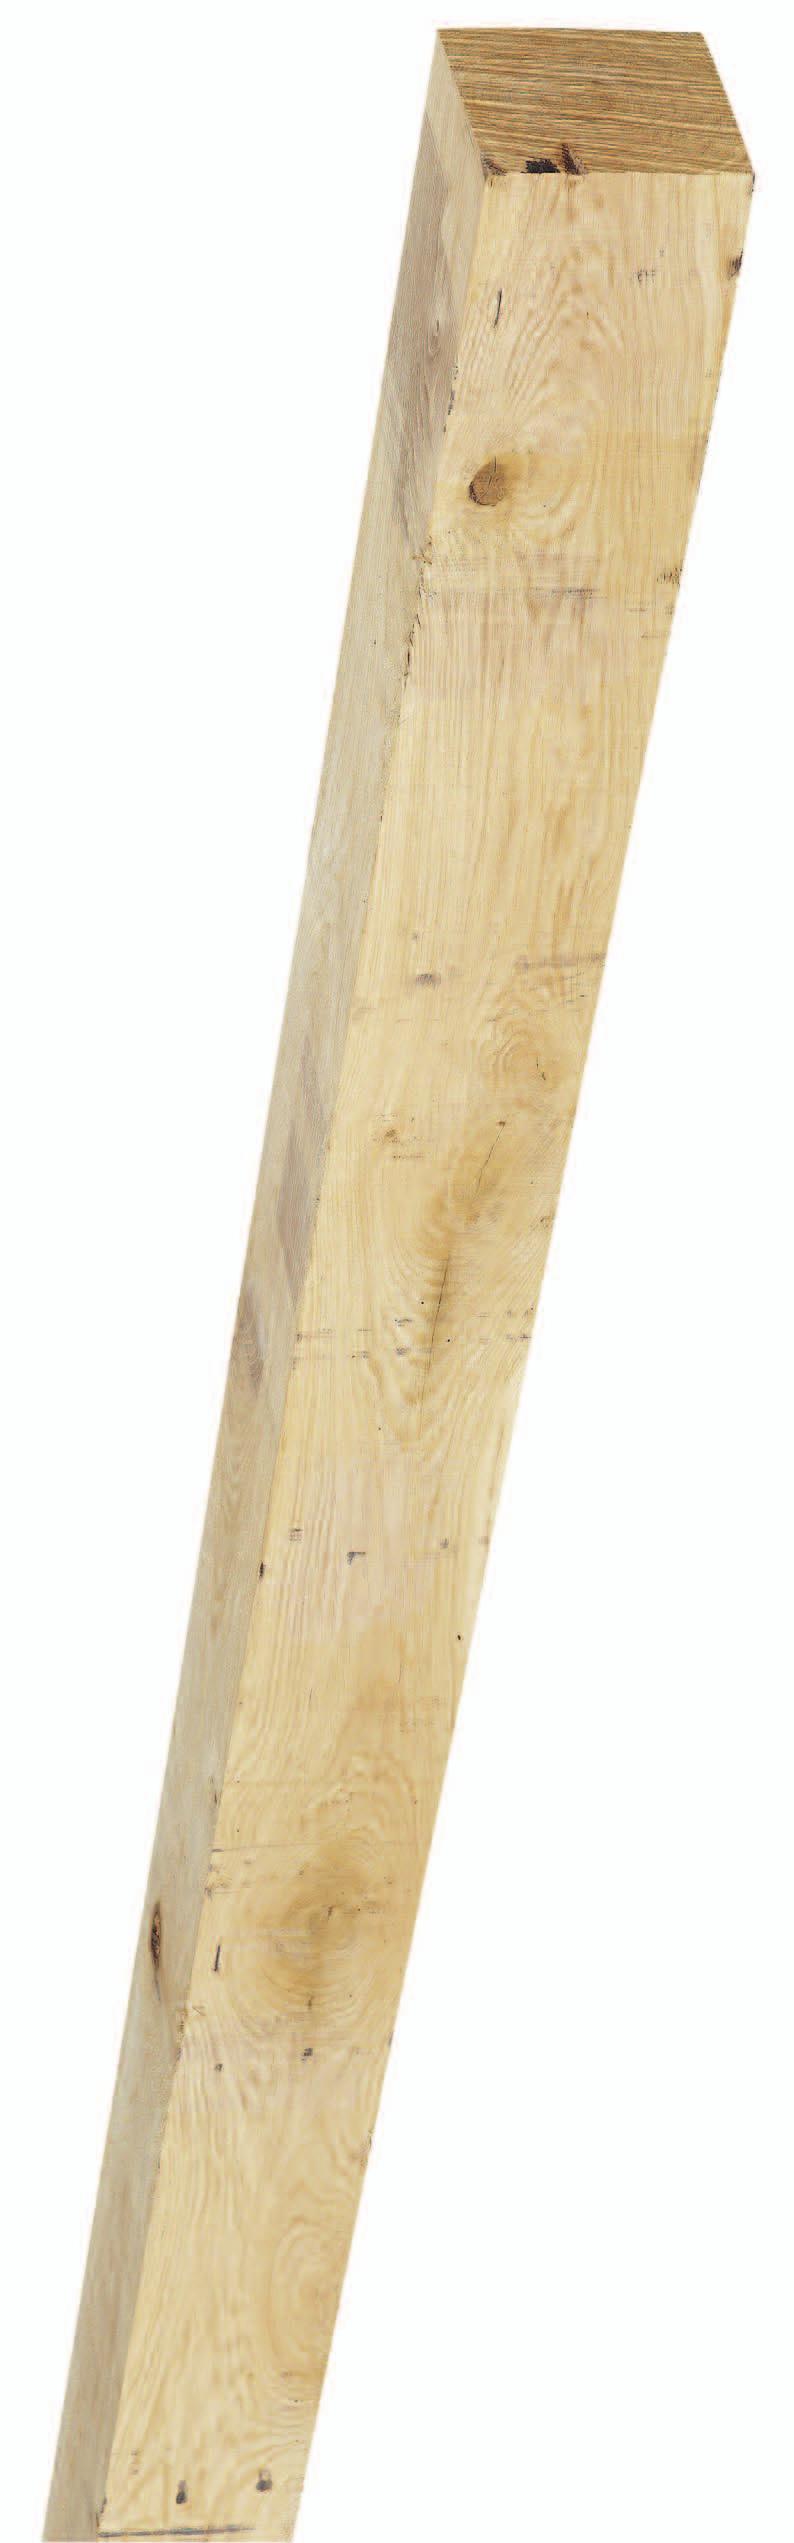 Beams Appearance grade Q-P A Sawn timber with sharp arrises; in case of pieces longer than 3 m, wane less than 10% of the face width is permitted across no more than 25% of the length.